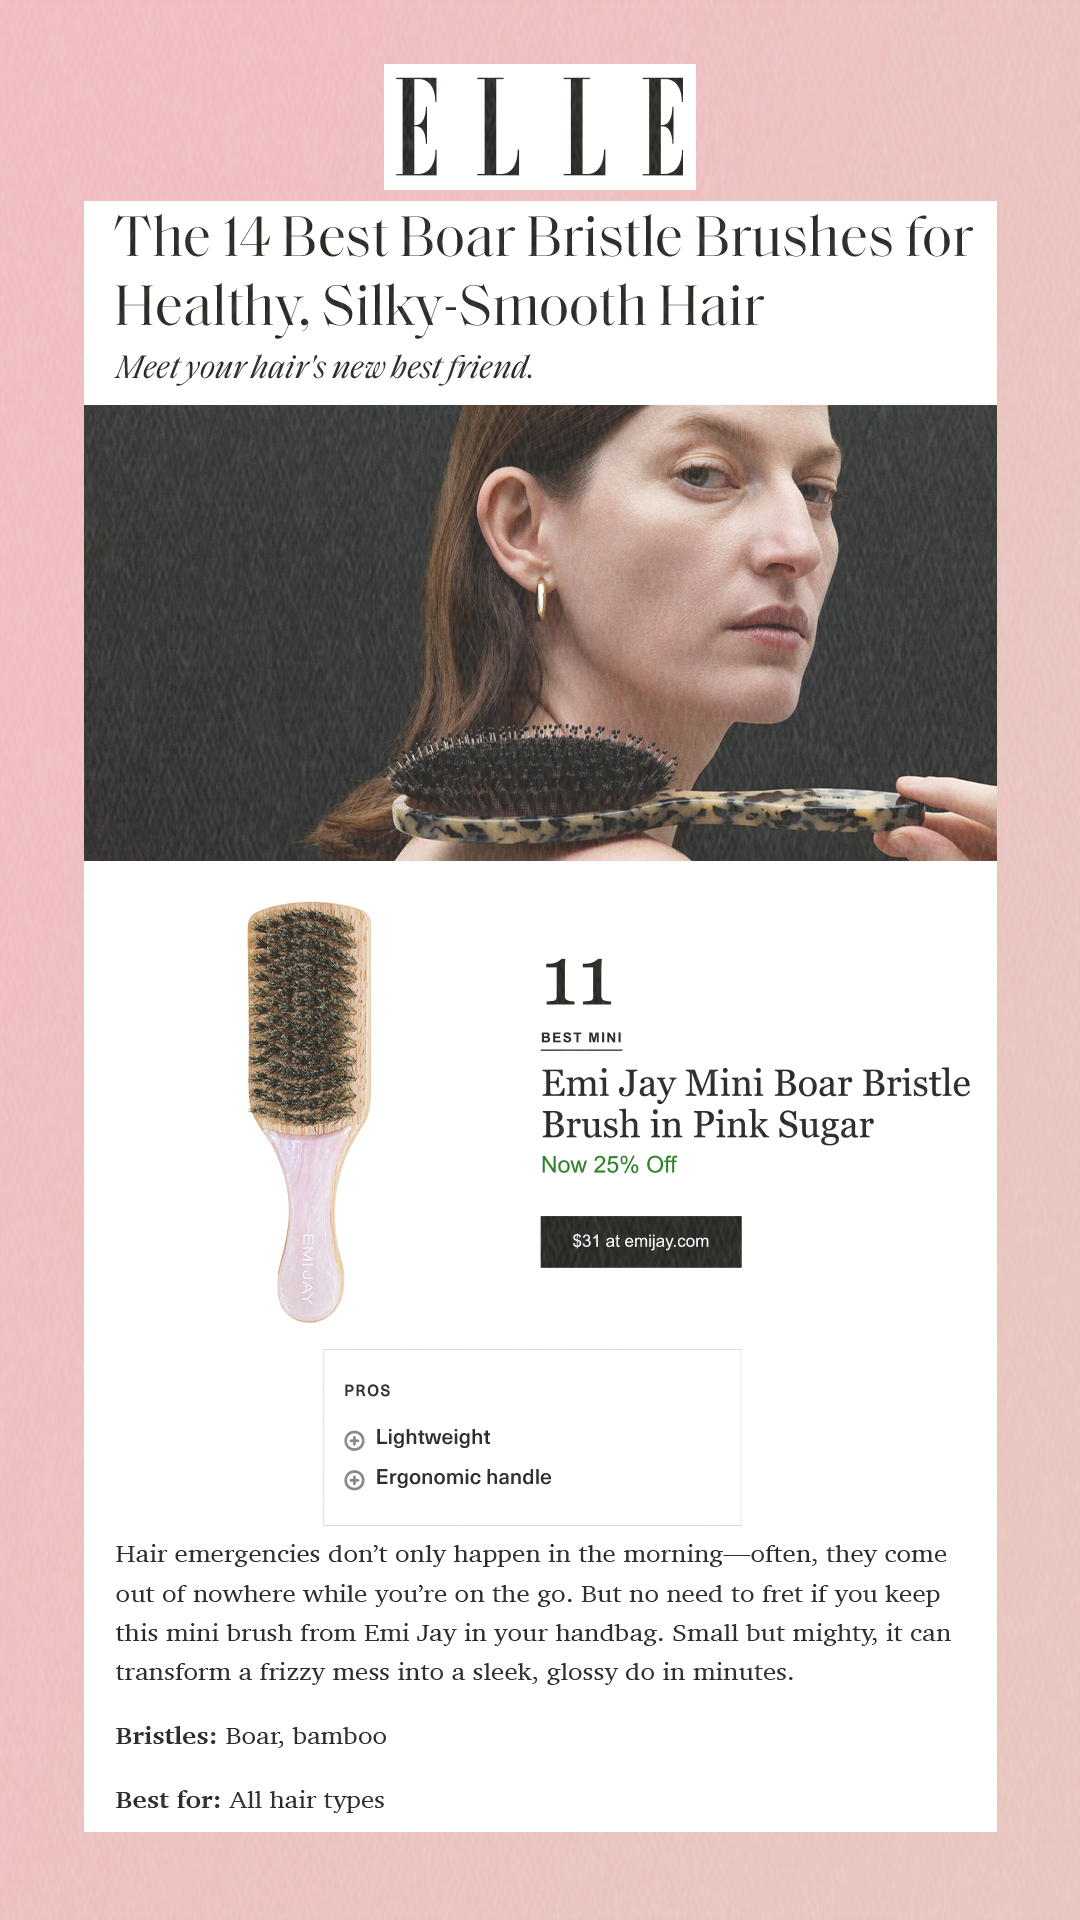 The 14 Best Boar Bristle Brushes for Healthy, Silky-Smooth Hair Meet your hair's new best friend. 11 Best Mini Emi Jay Mini Boar Bristle Brush in Pink Sugar Now 25% Off $31 at emijay.com Pros Pro Lightweight Pro Ergonomic handle Cons Con On the pricier side Hair emergencies don’t only happen in the morning—often, they come out of nowhere while you’re on the go. But no need to fret if you keep this mini brush from Emi Jay in your handbag. Small but mighty, it can transform a frizzy mess into a sleek, glossy do in minutes.Bristles: Boar, bamboo Best for: All hair types